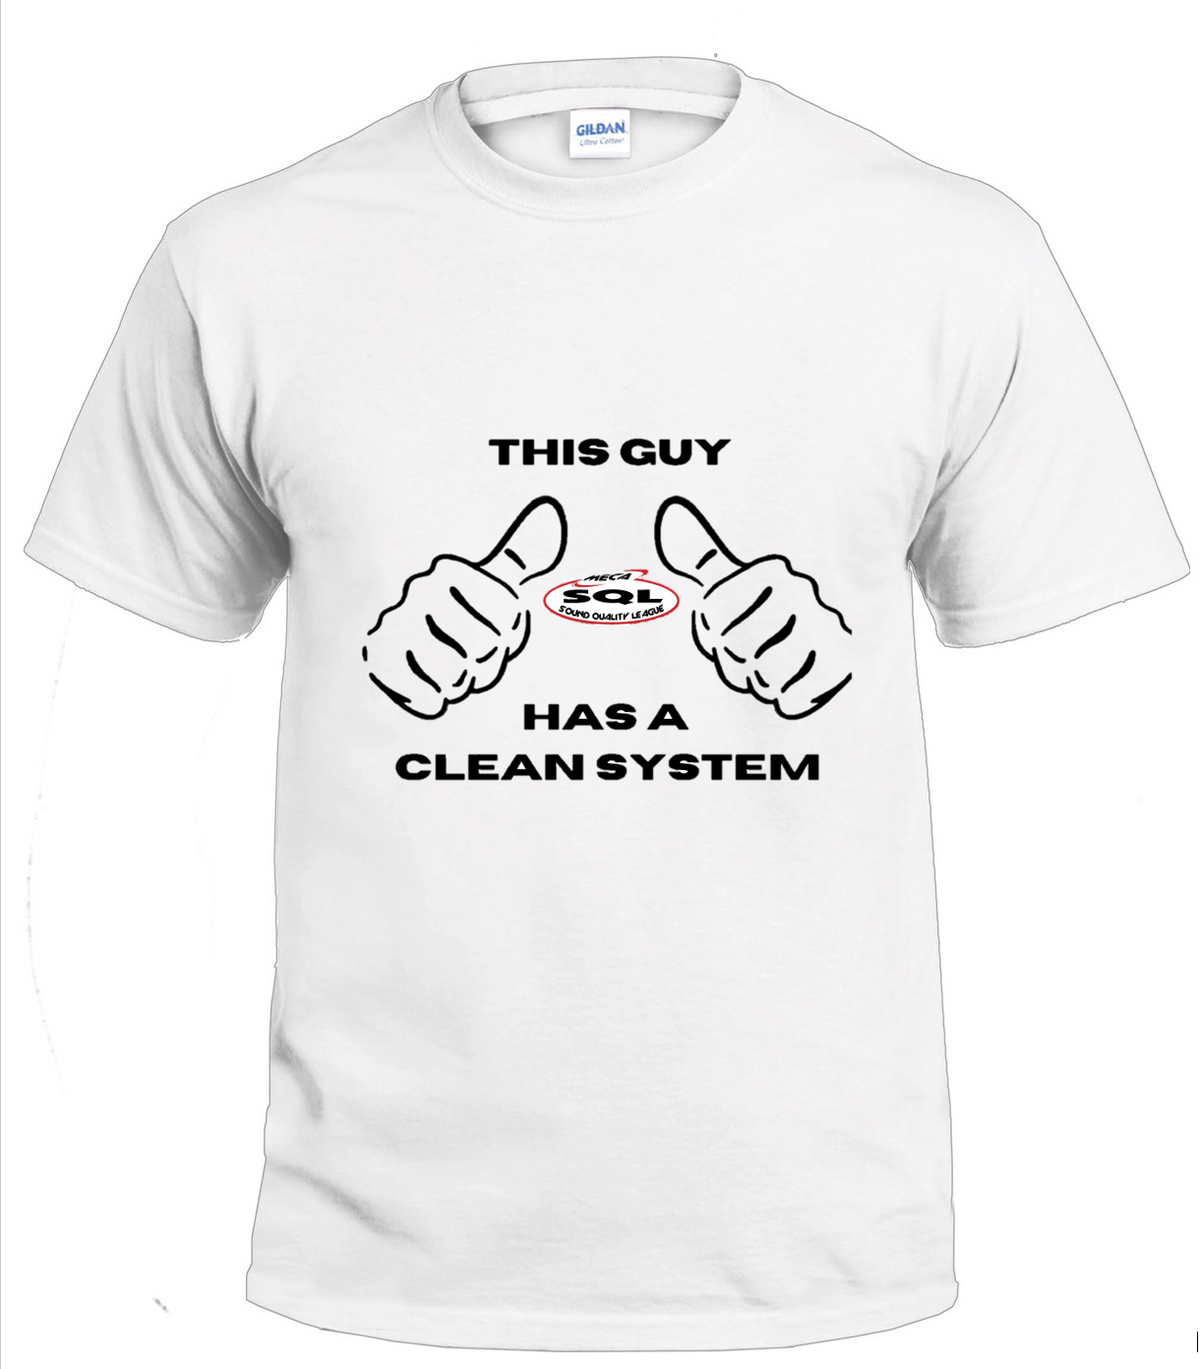 This Guy Has a Clean System t-shirt